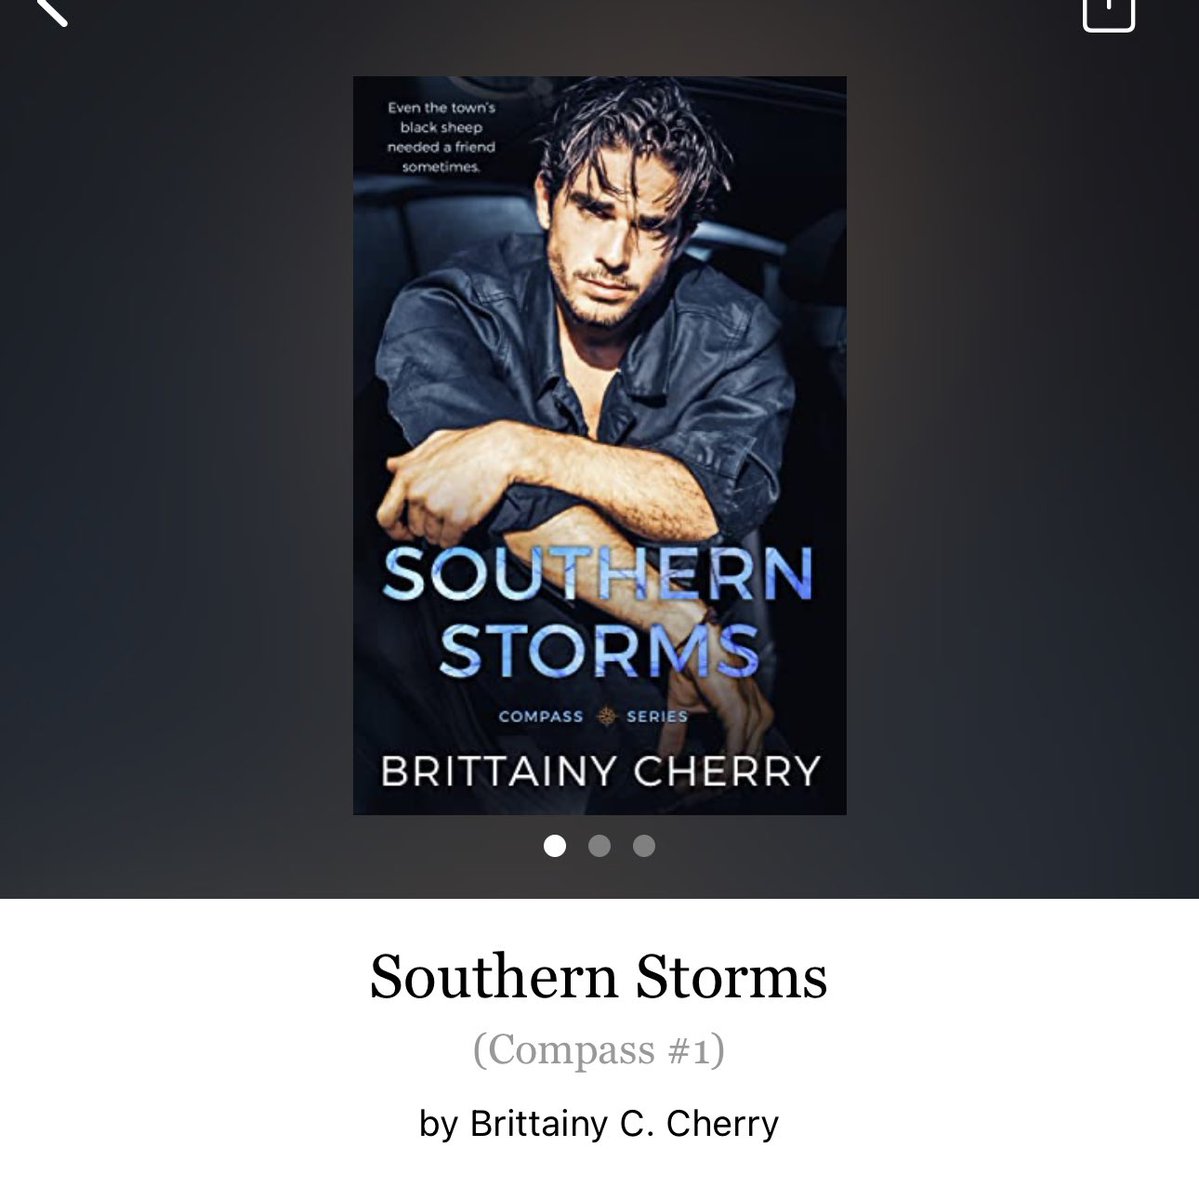 Southern Storms by Brittainy Cherry

#SouthernStorms by #BrittainyCherry #5021 #369chapters #285pages #564of400 #Series #book1of4 #Audiobook #26for7 #8hourAudiobook #HCPL #KennedyAndJax #CompassSeries #June2023 #clearingoffreadingshelves #whatsnext #readiitquick